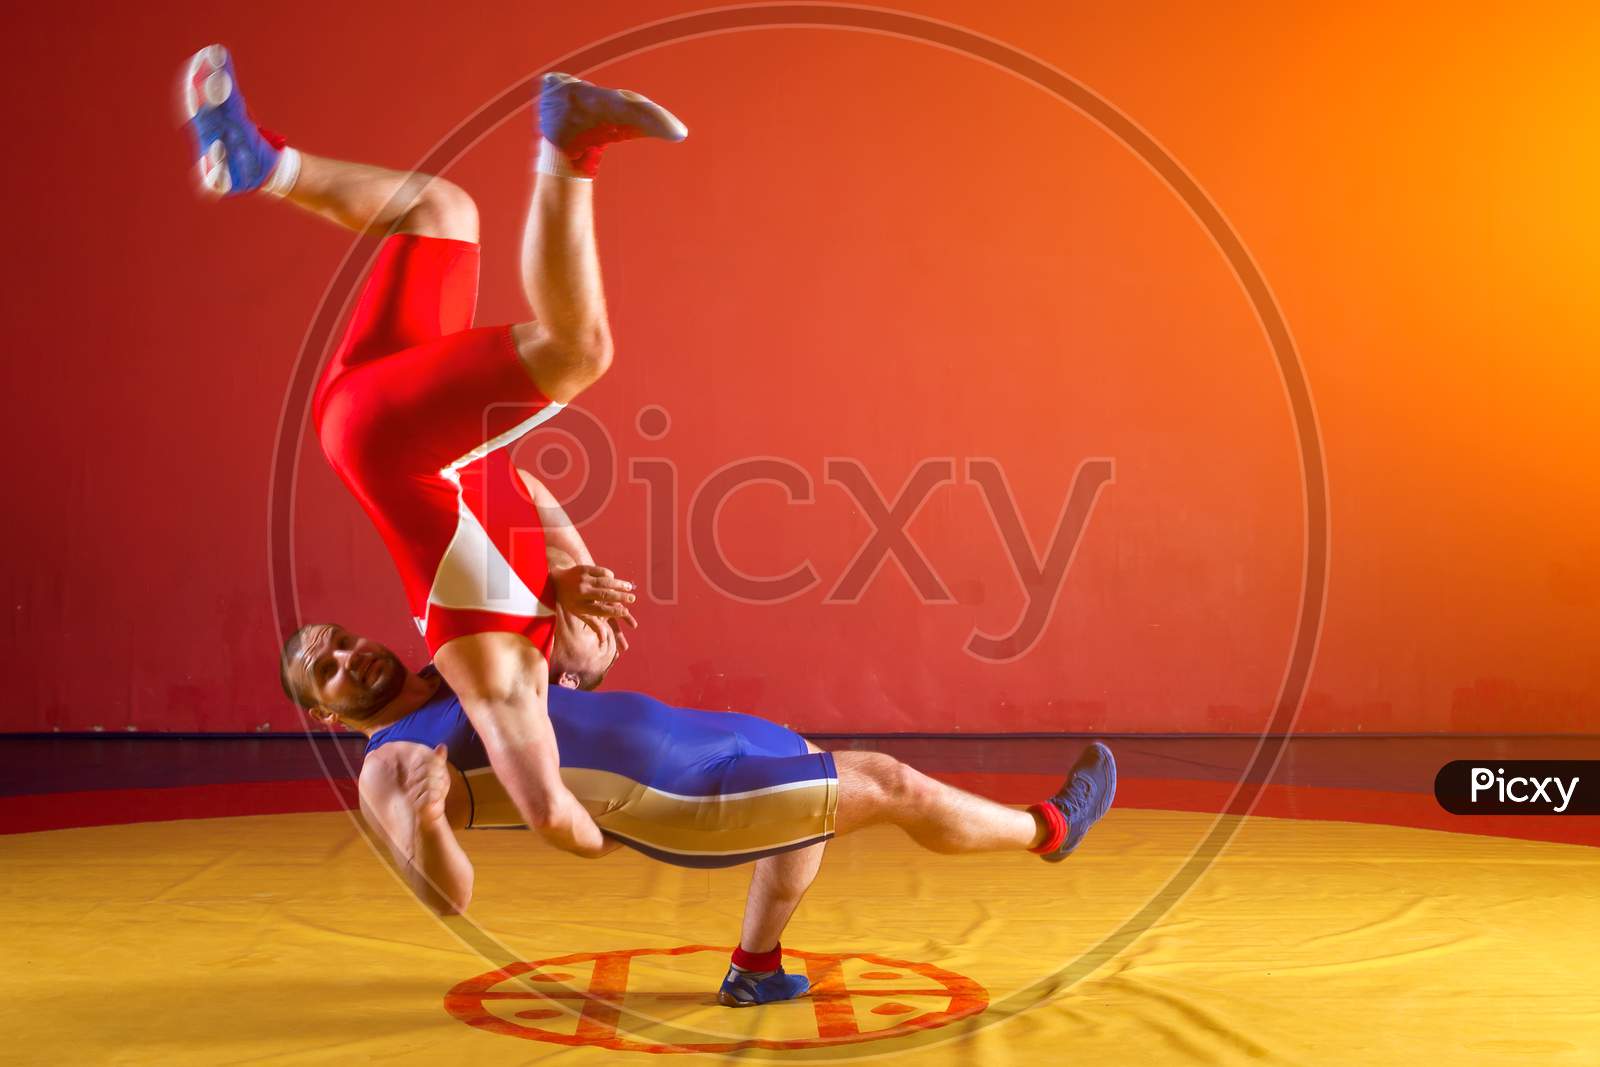 Two Young Men In Blue And Red Wrestling Tights Are Wrestlng And Making A Suplex Wrestling On A Yellow Wrestling Carpet In The Gym